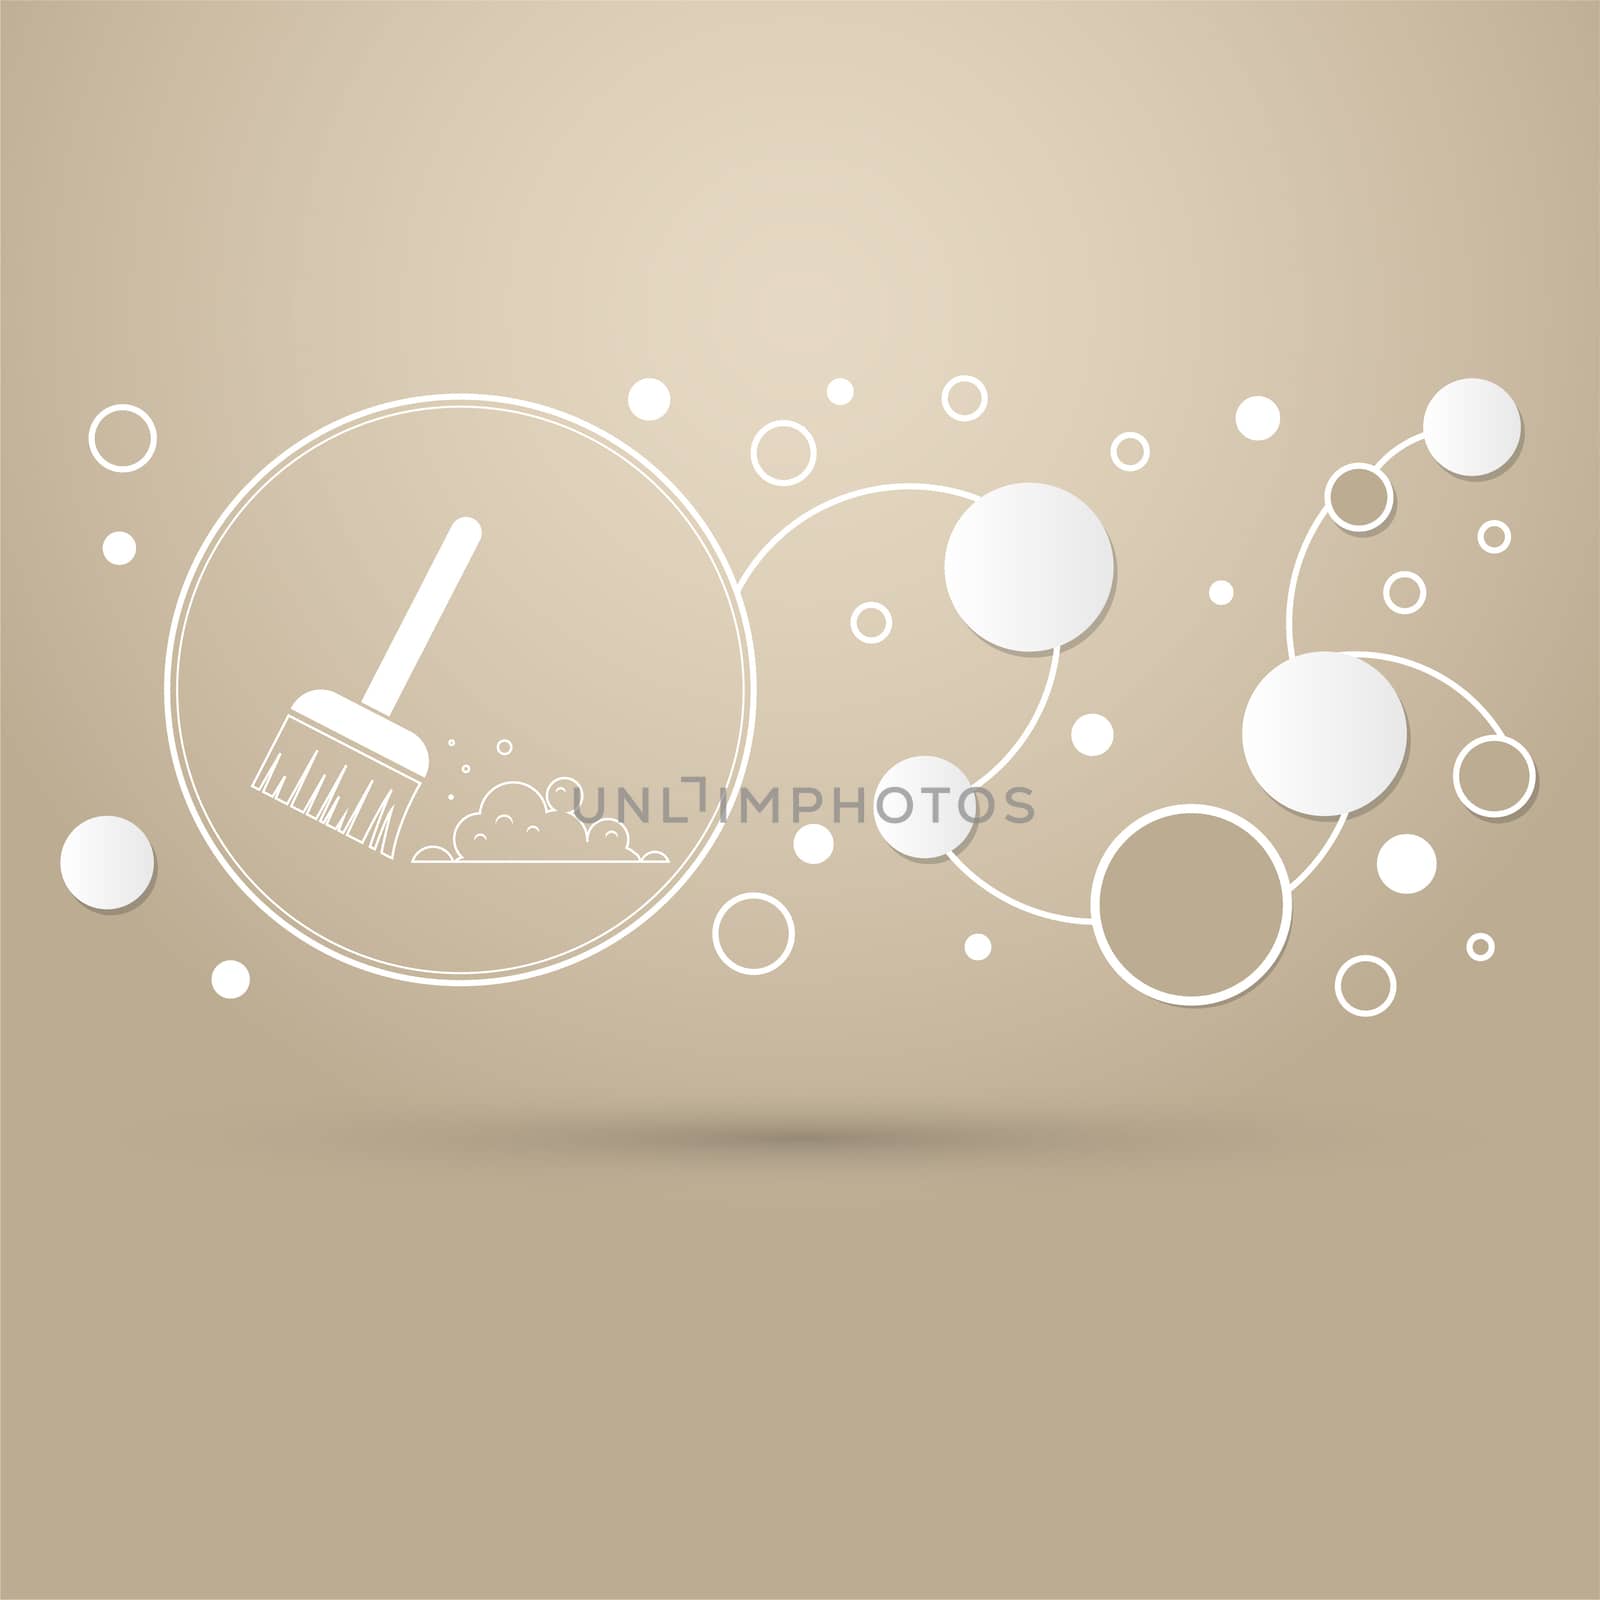 Broom icon on a brown background with elegant style and modern design infographic. illustration